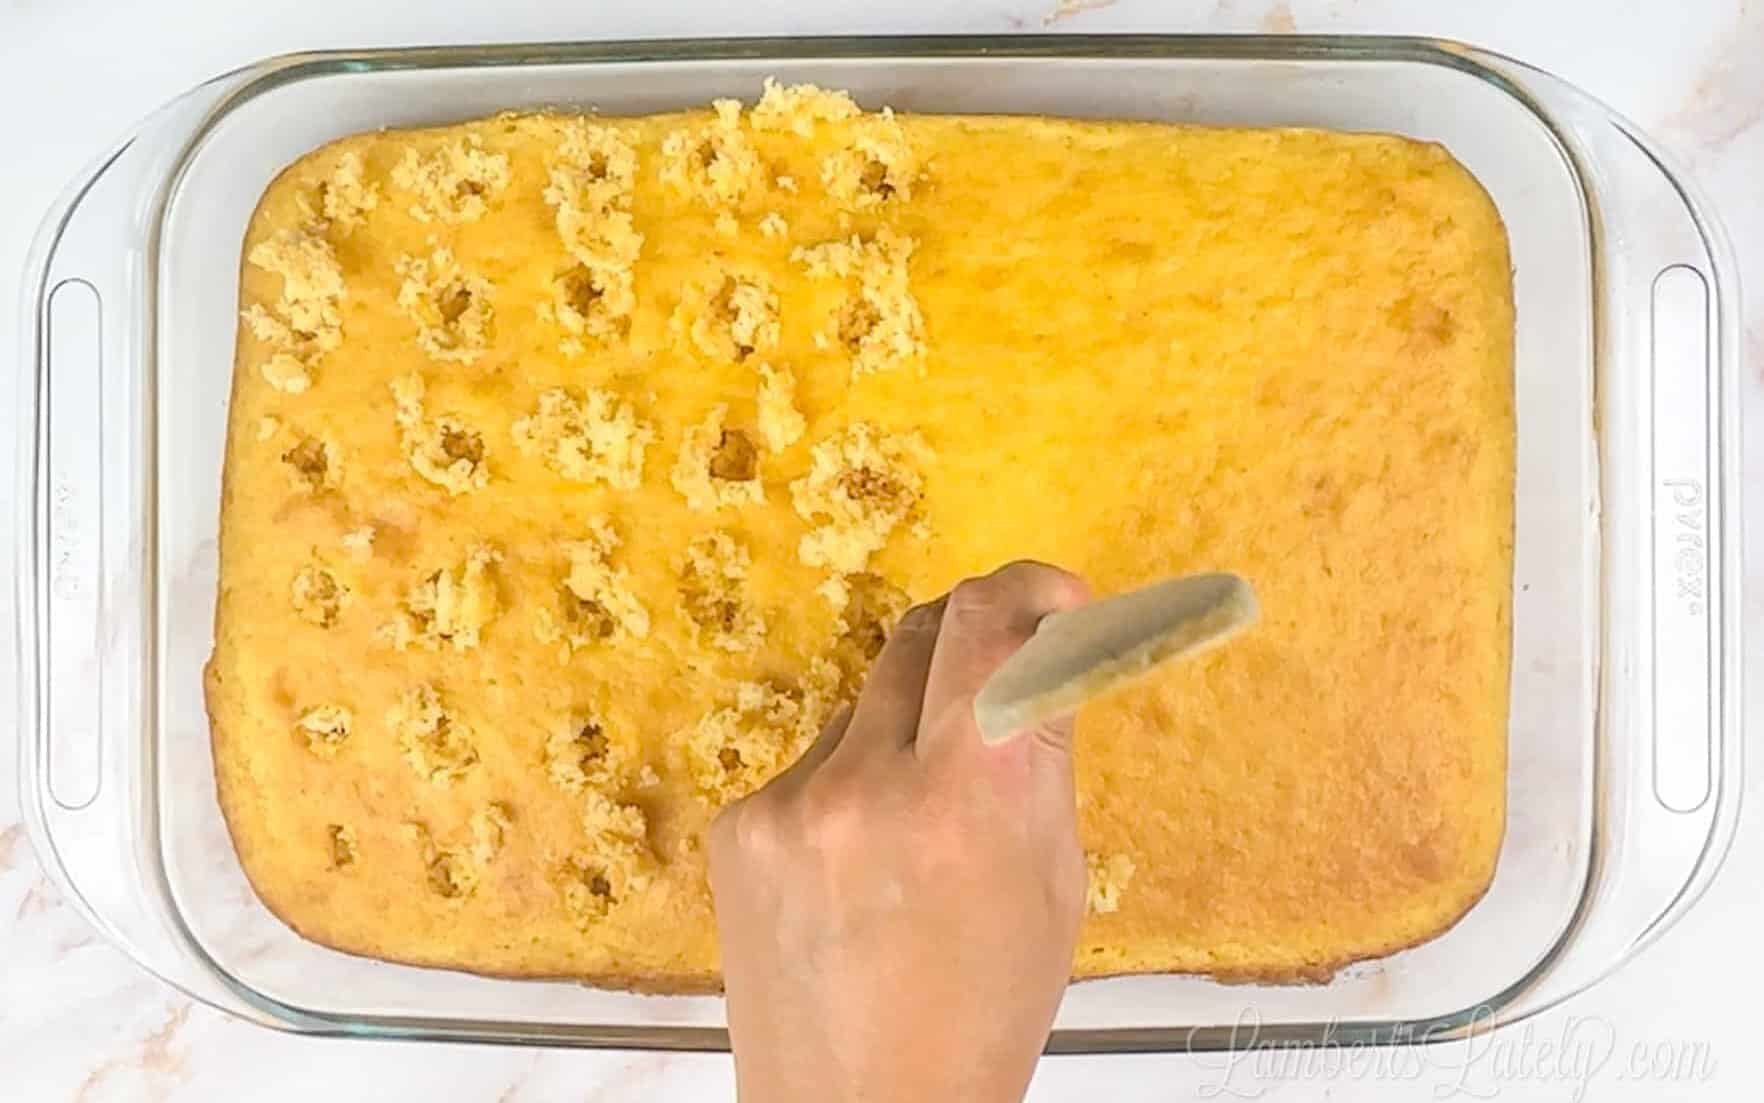 poking holes in a banana cake with a wooden spoon handle.